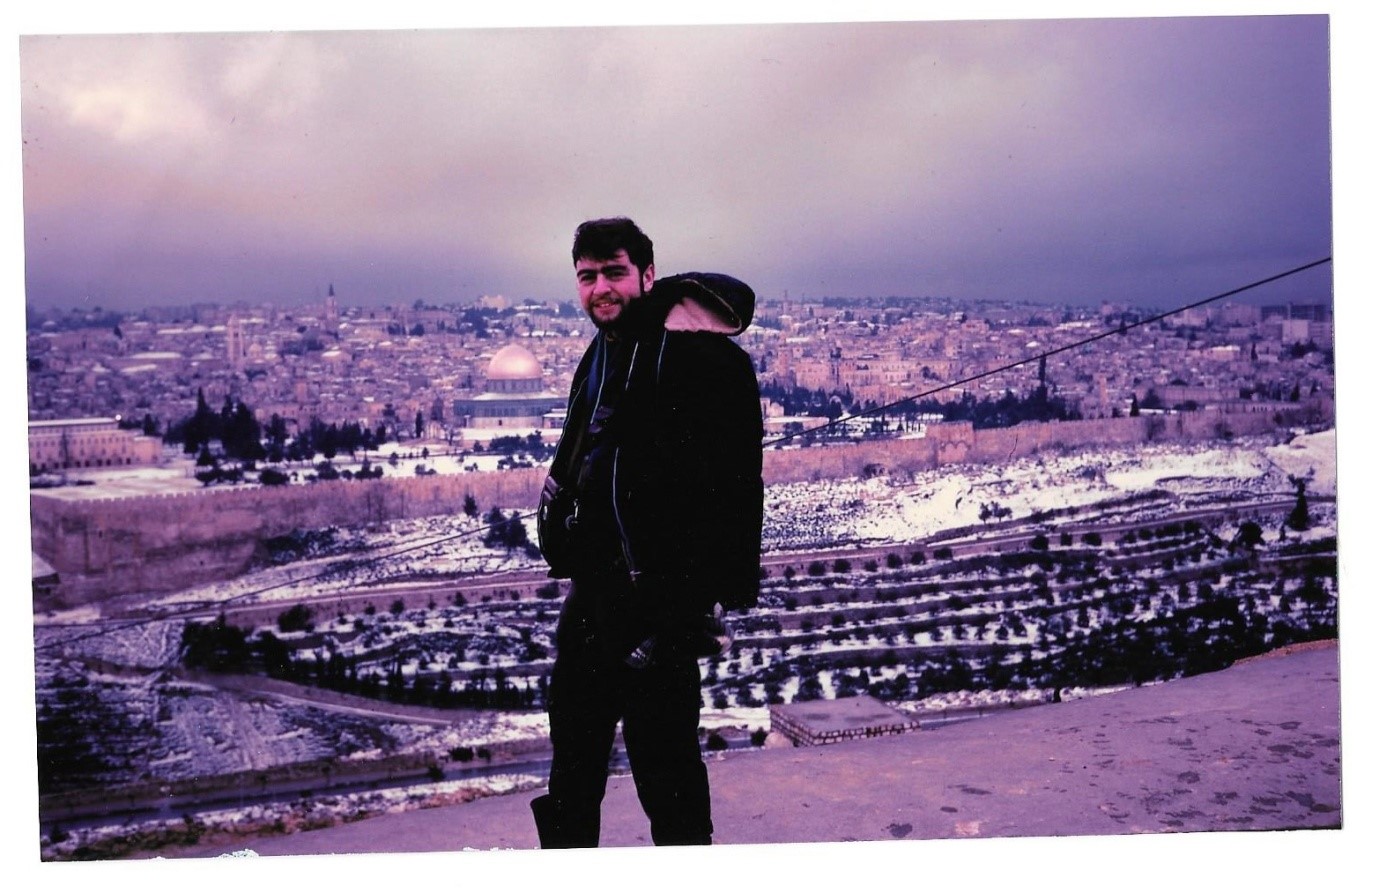 [In the camera that was found at the bombing site was this photo which was taken with the scenery of Jerusalem. This photo was later developed as Leon did not get the chance to see it]